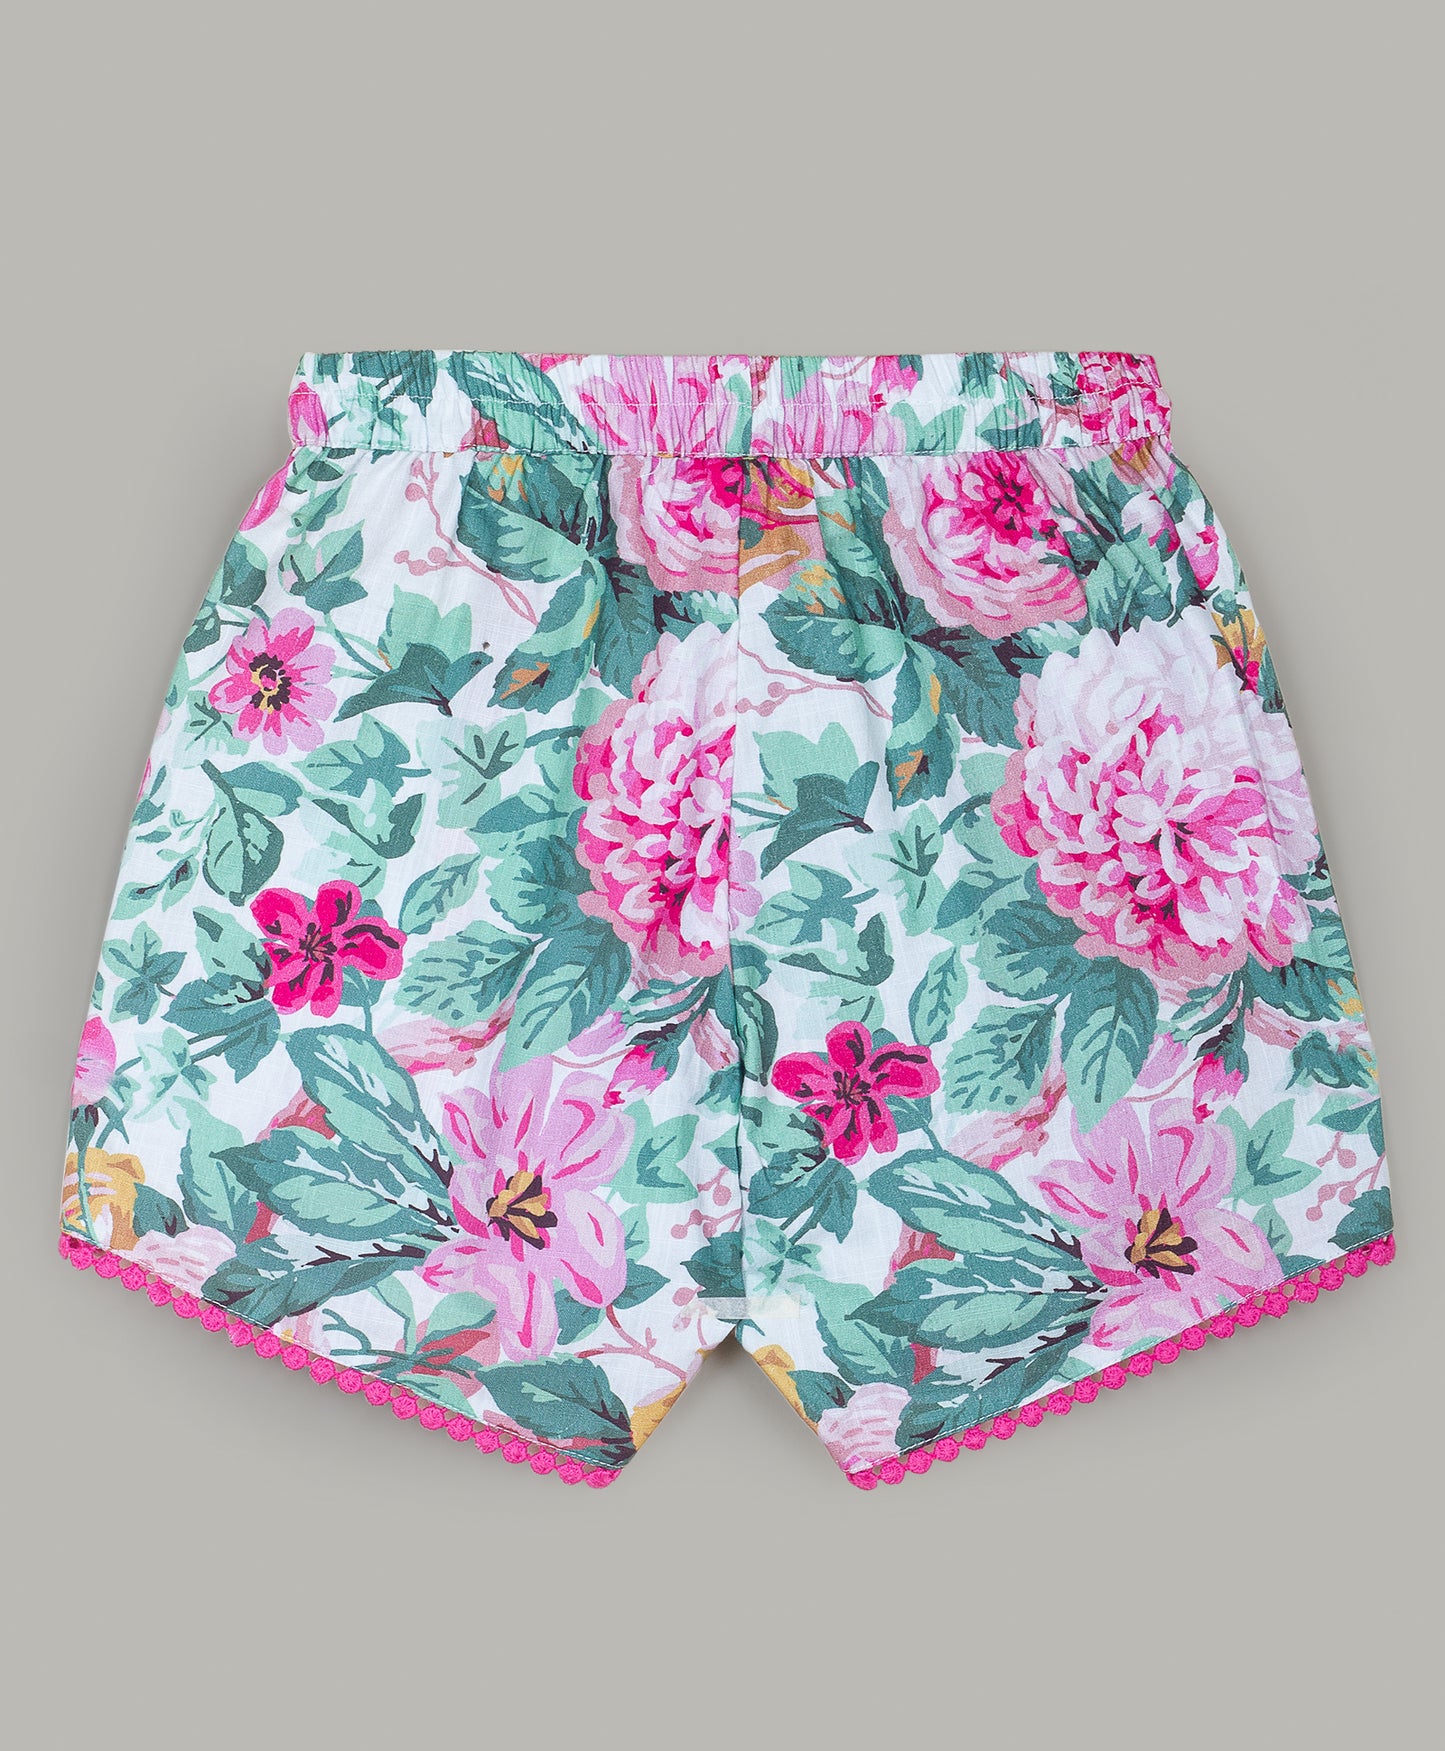 Floral Print Shorts with contrast lace along all seams